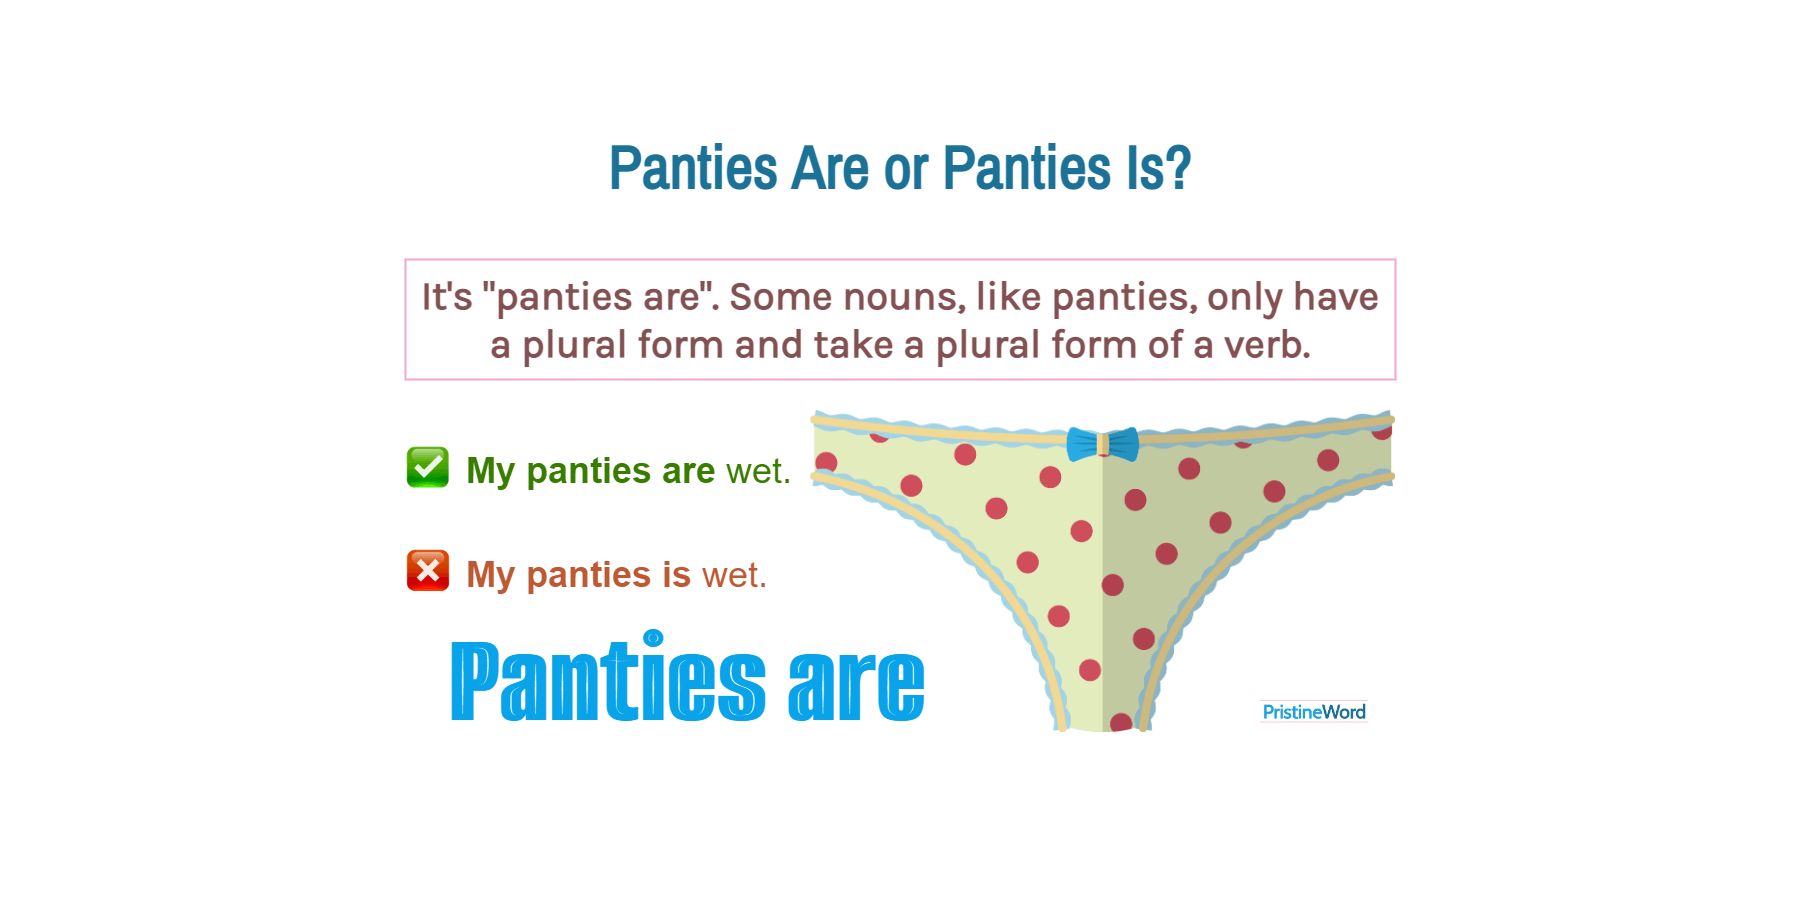 Panties Are Or Panties Is. Which Is Correct?